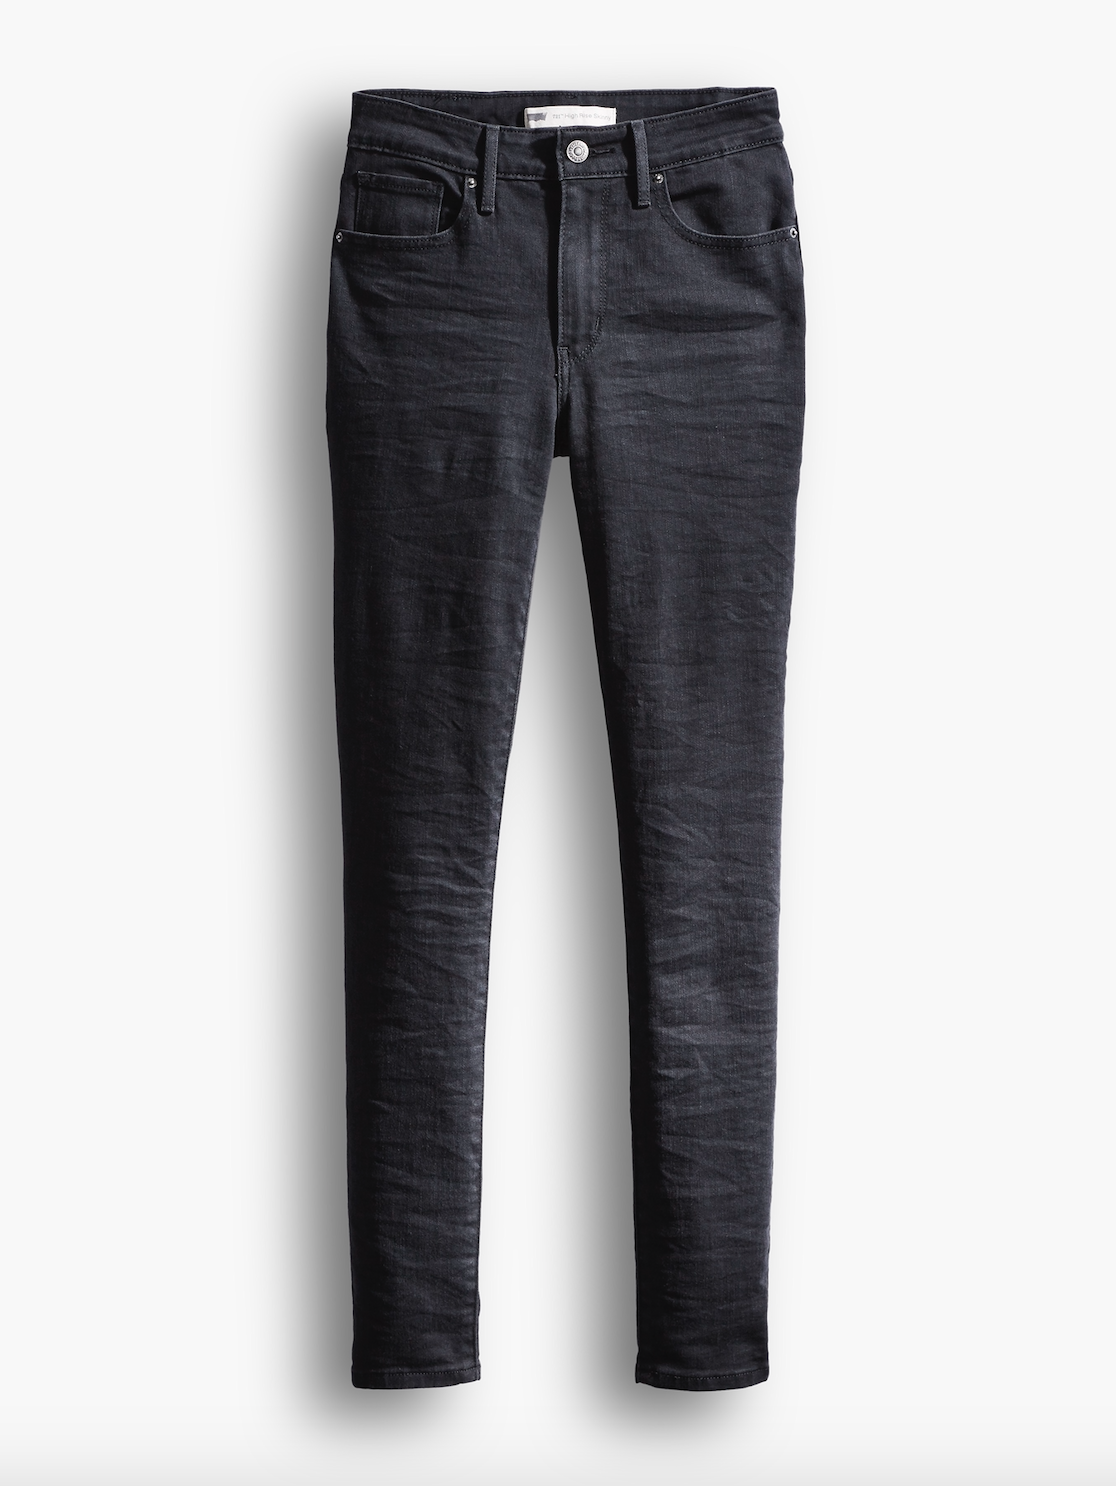 Levi’s + 721 Modern Fit High Rise Skinny Jeans